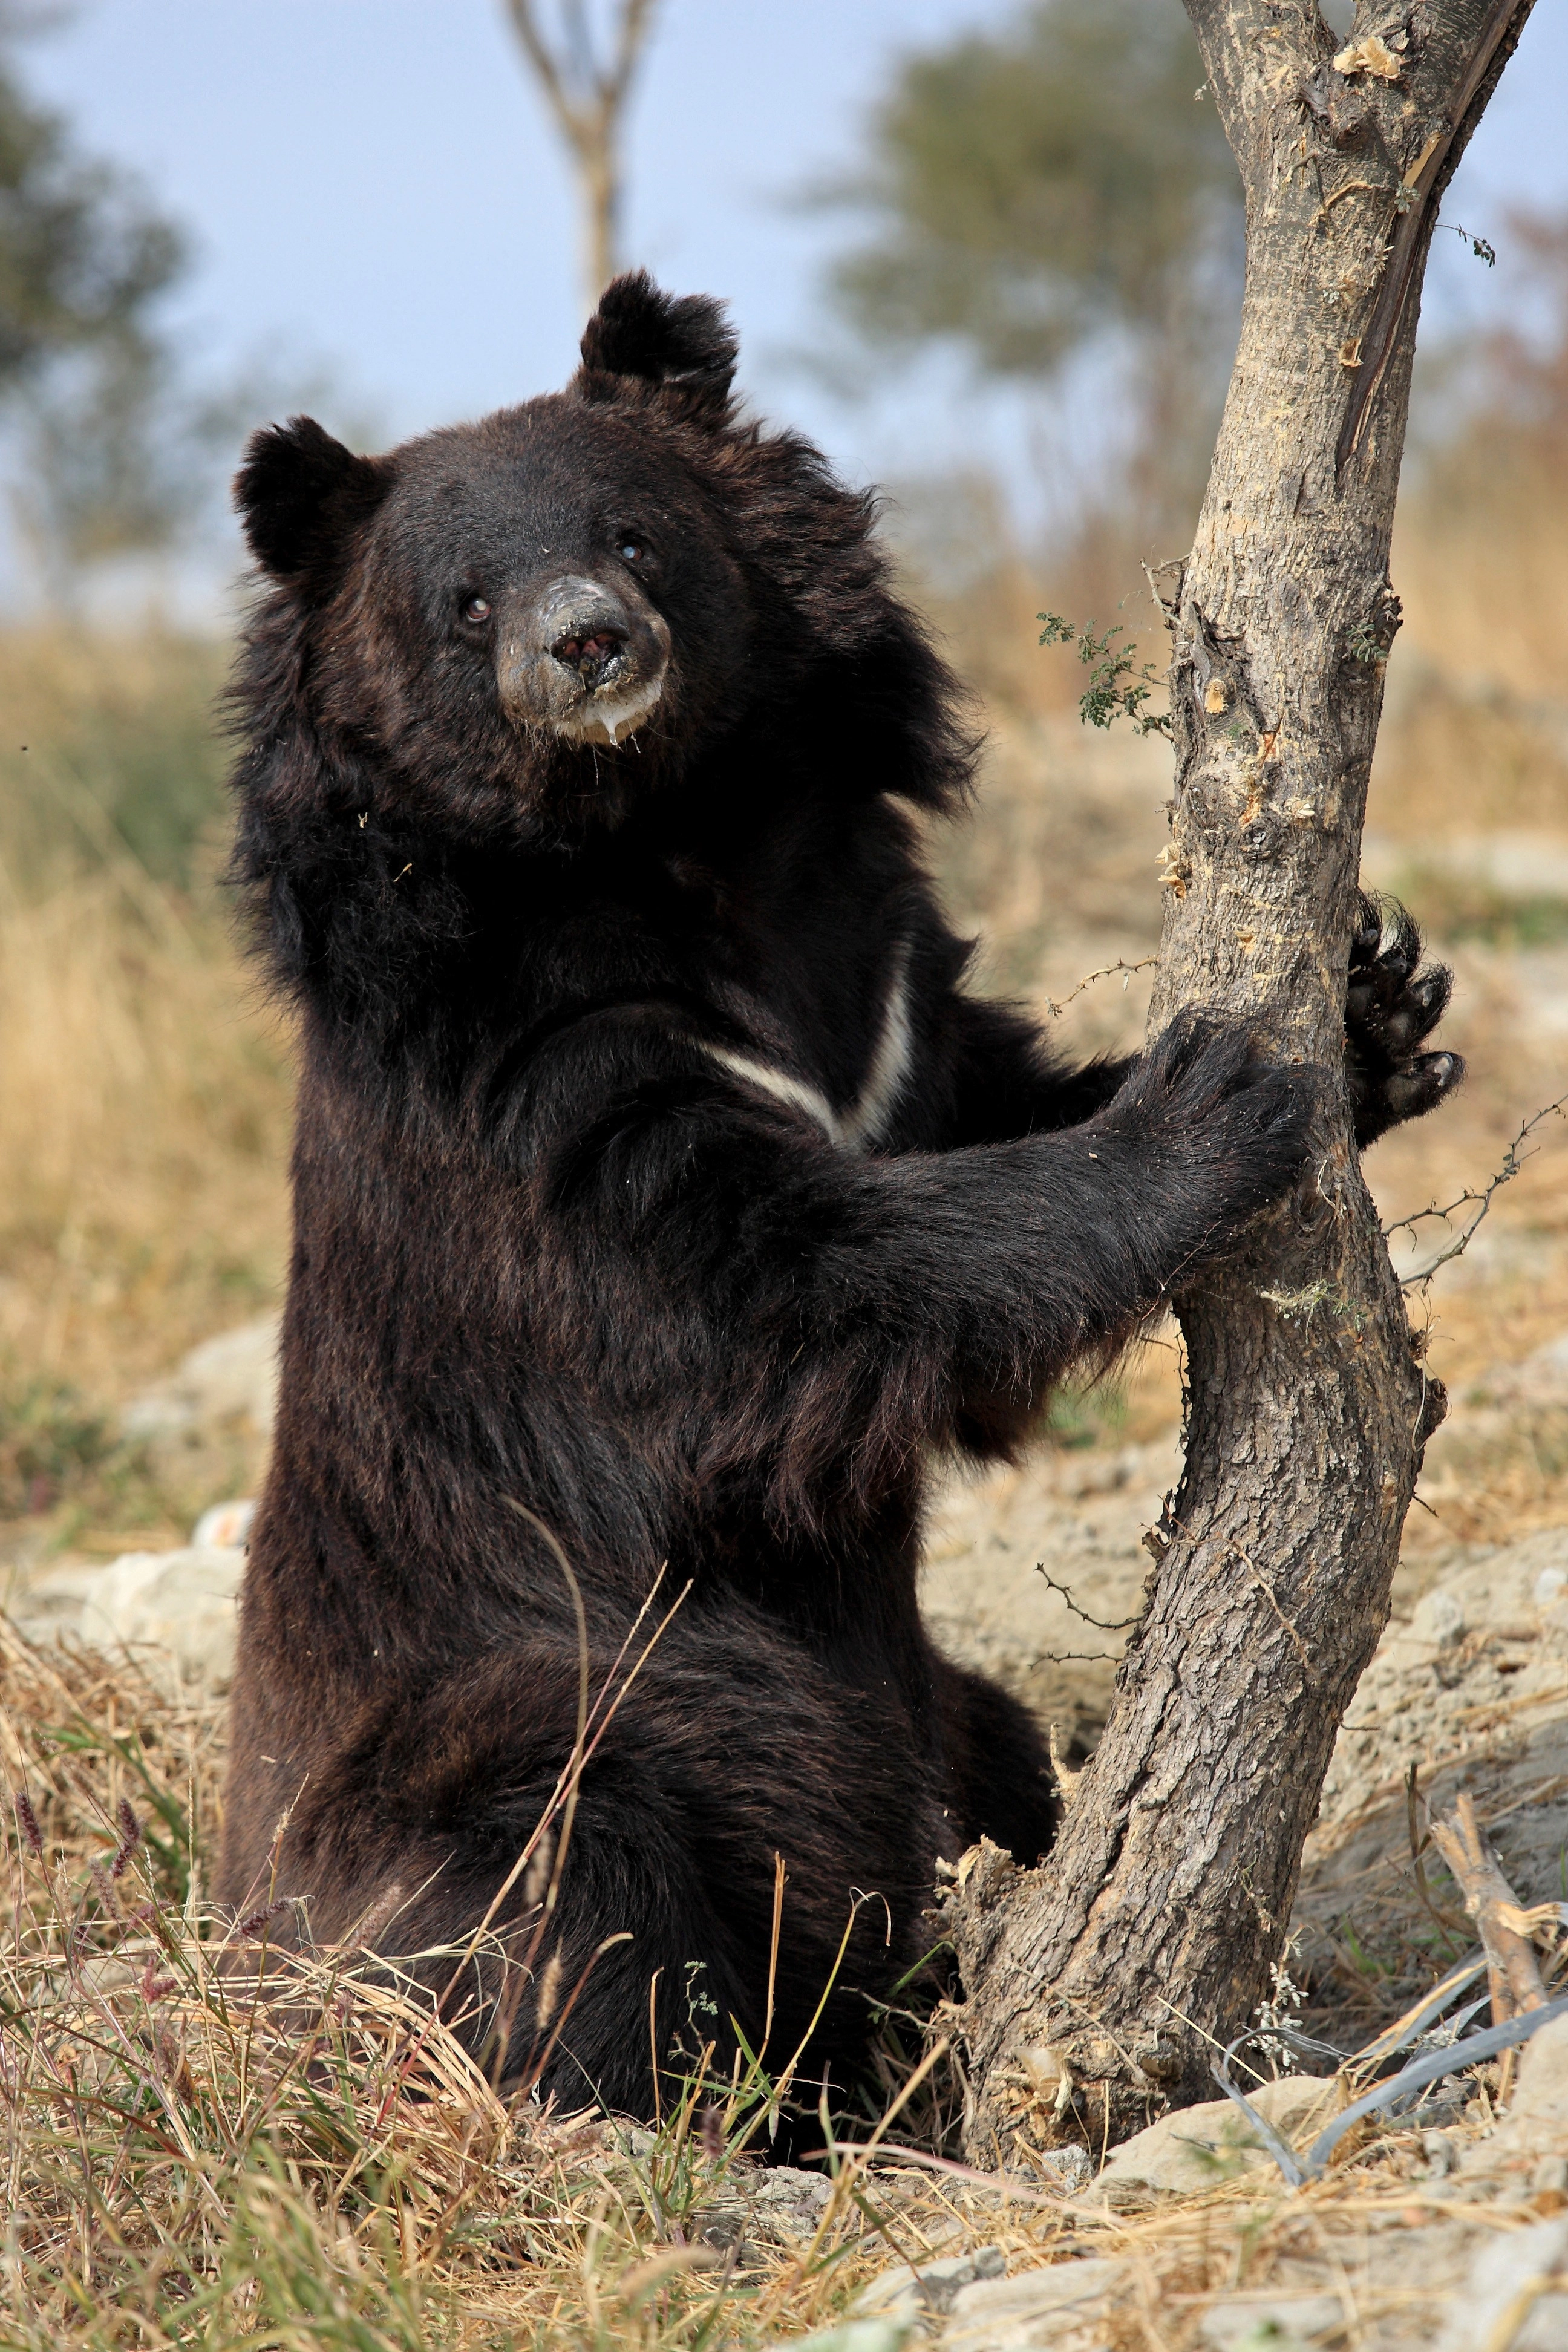 Chowti, a blind female asiatic bear, was used in the bear baiting trade. Her owner refused to give her up for an alternative liveihood and BRC were forced to confiscate her.